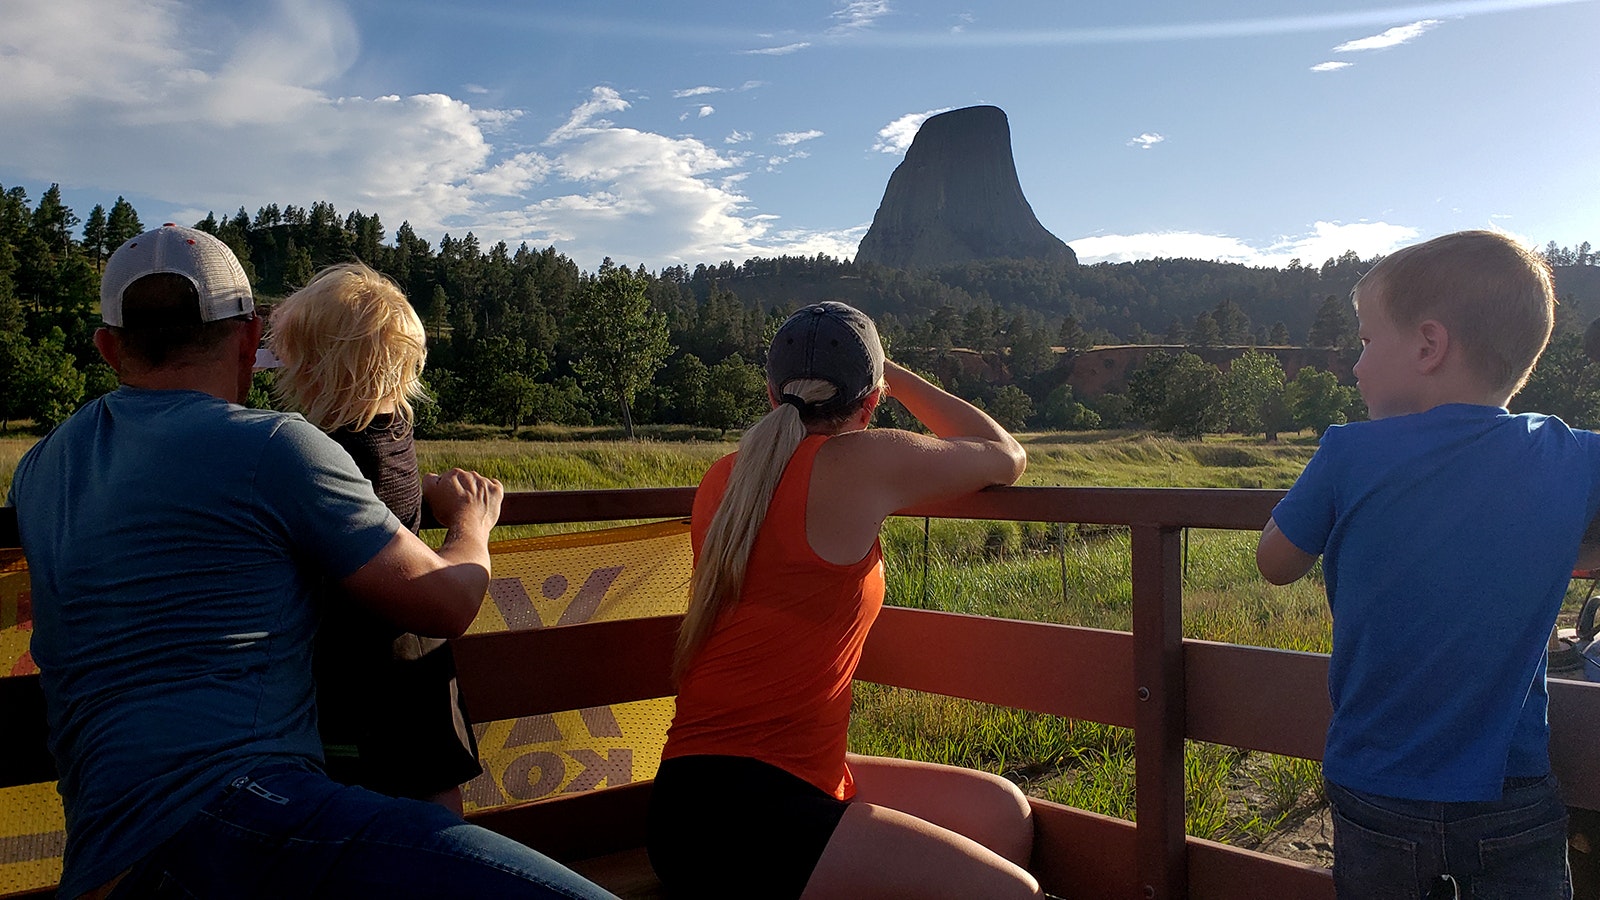 Participants on a hayride around the Campstool Ranch marvel at the distant Devils Tower, which can be seen from many angles during the hayride.